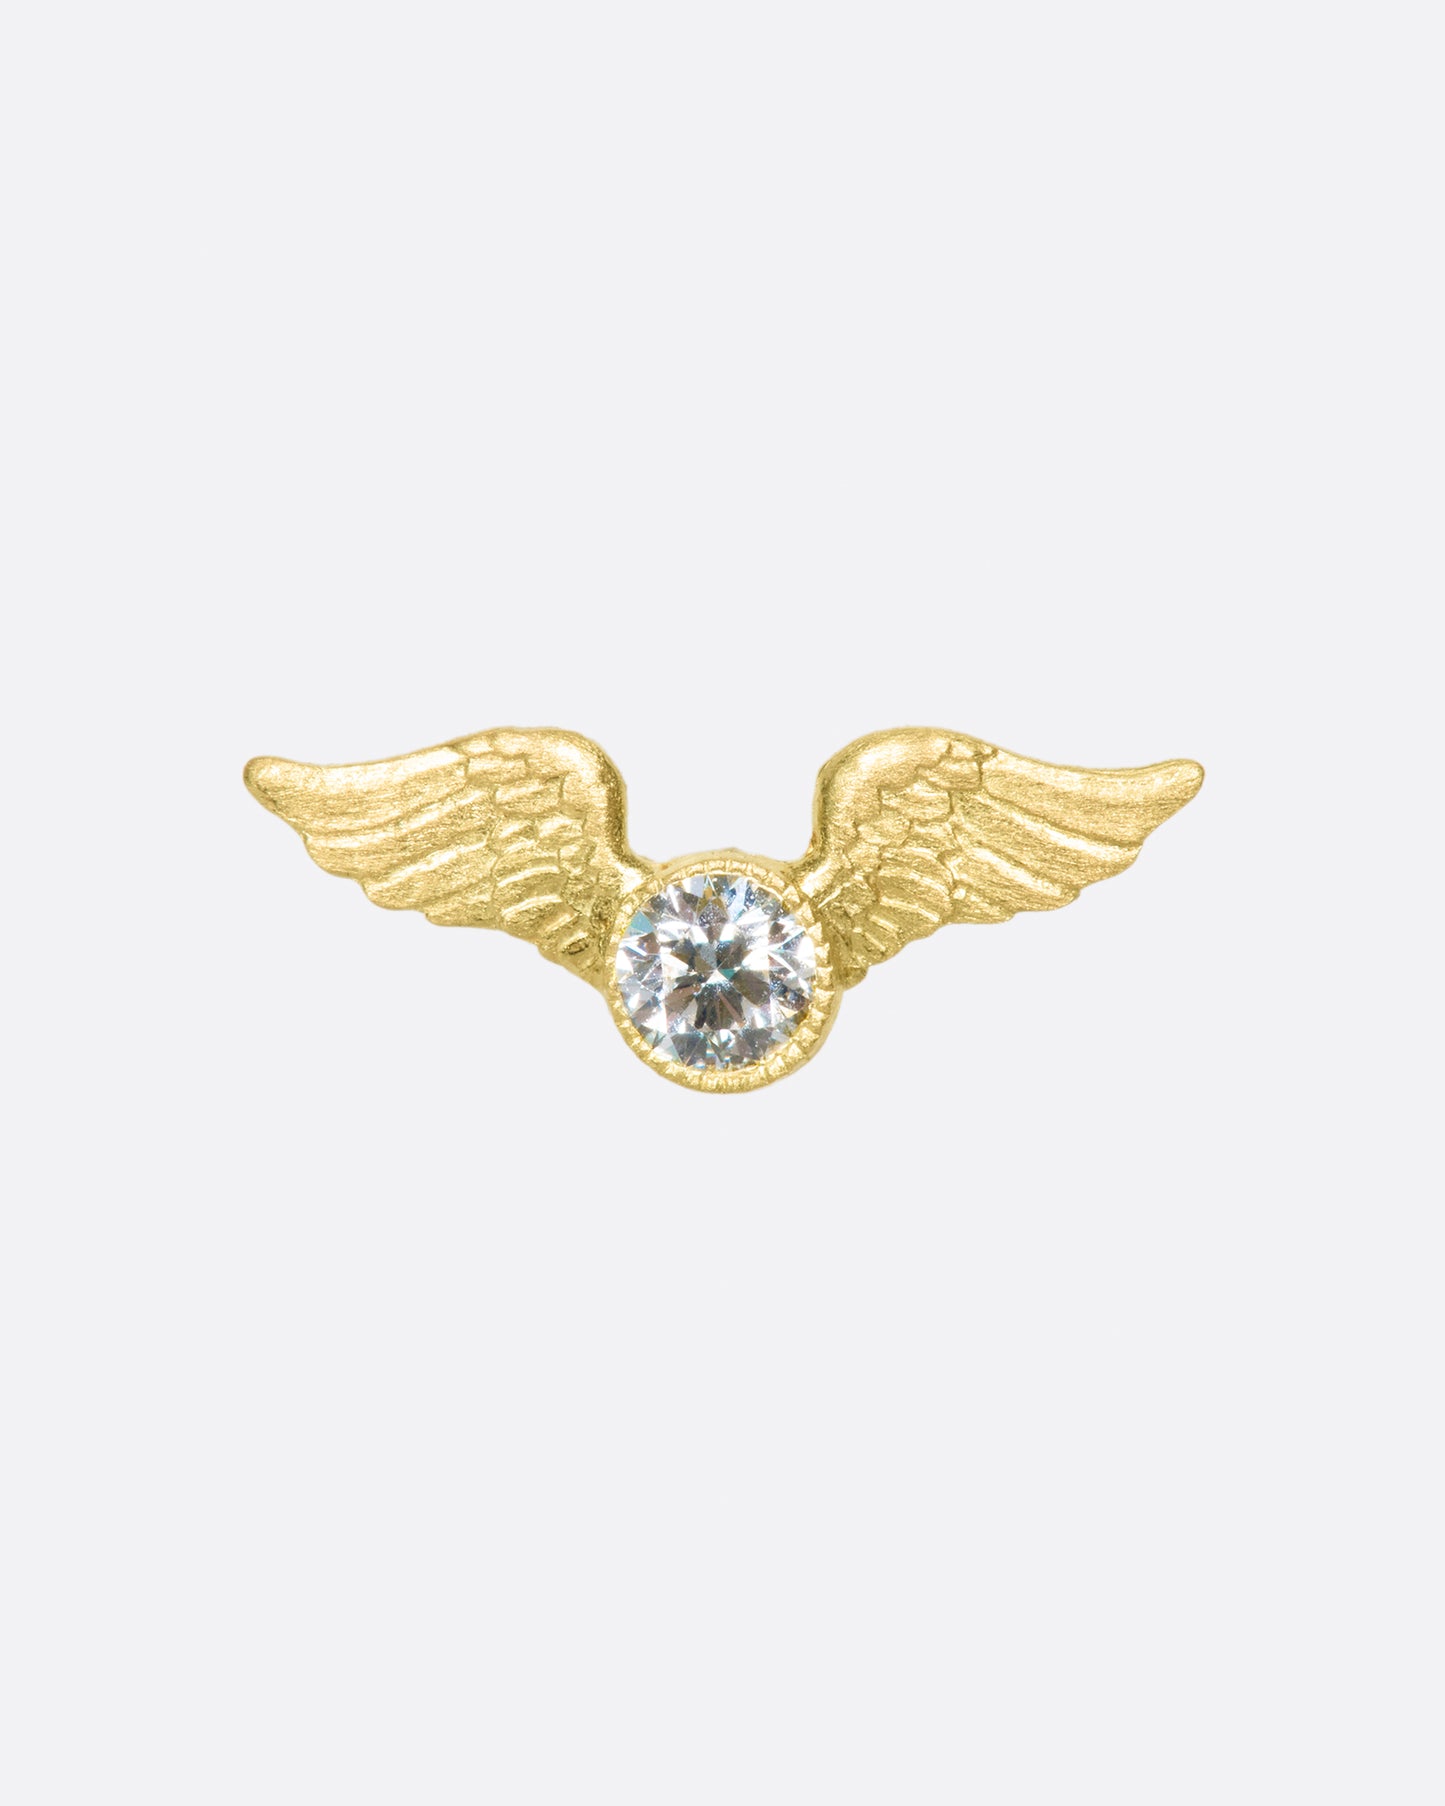 This little stud is inspired by the winged mountings and pavé wing pieces of late Victorian jewelry.